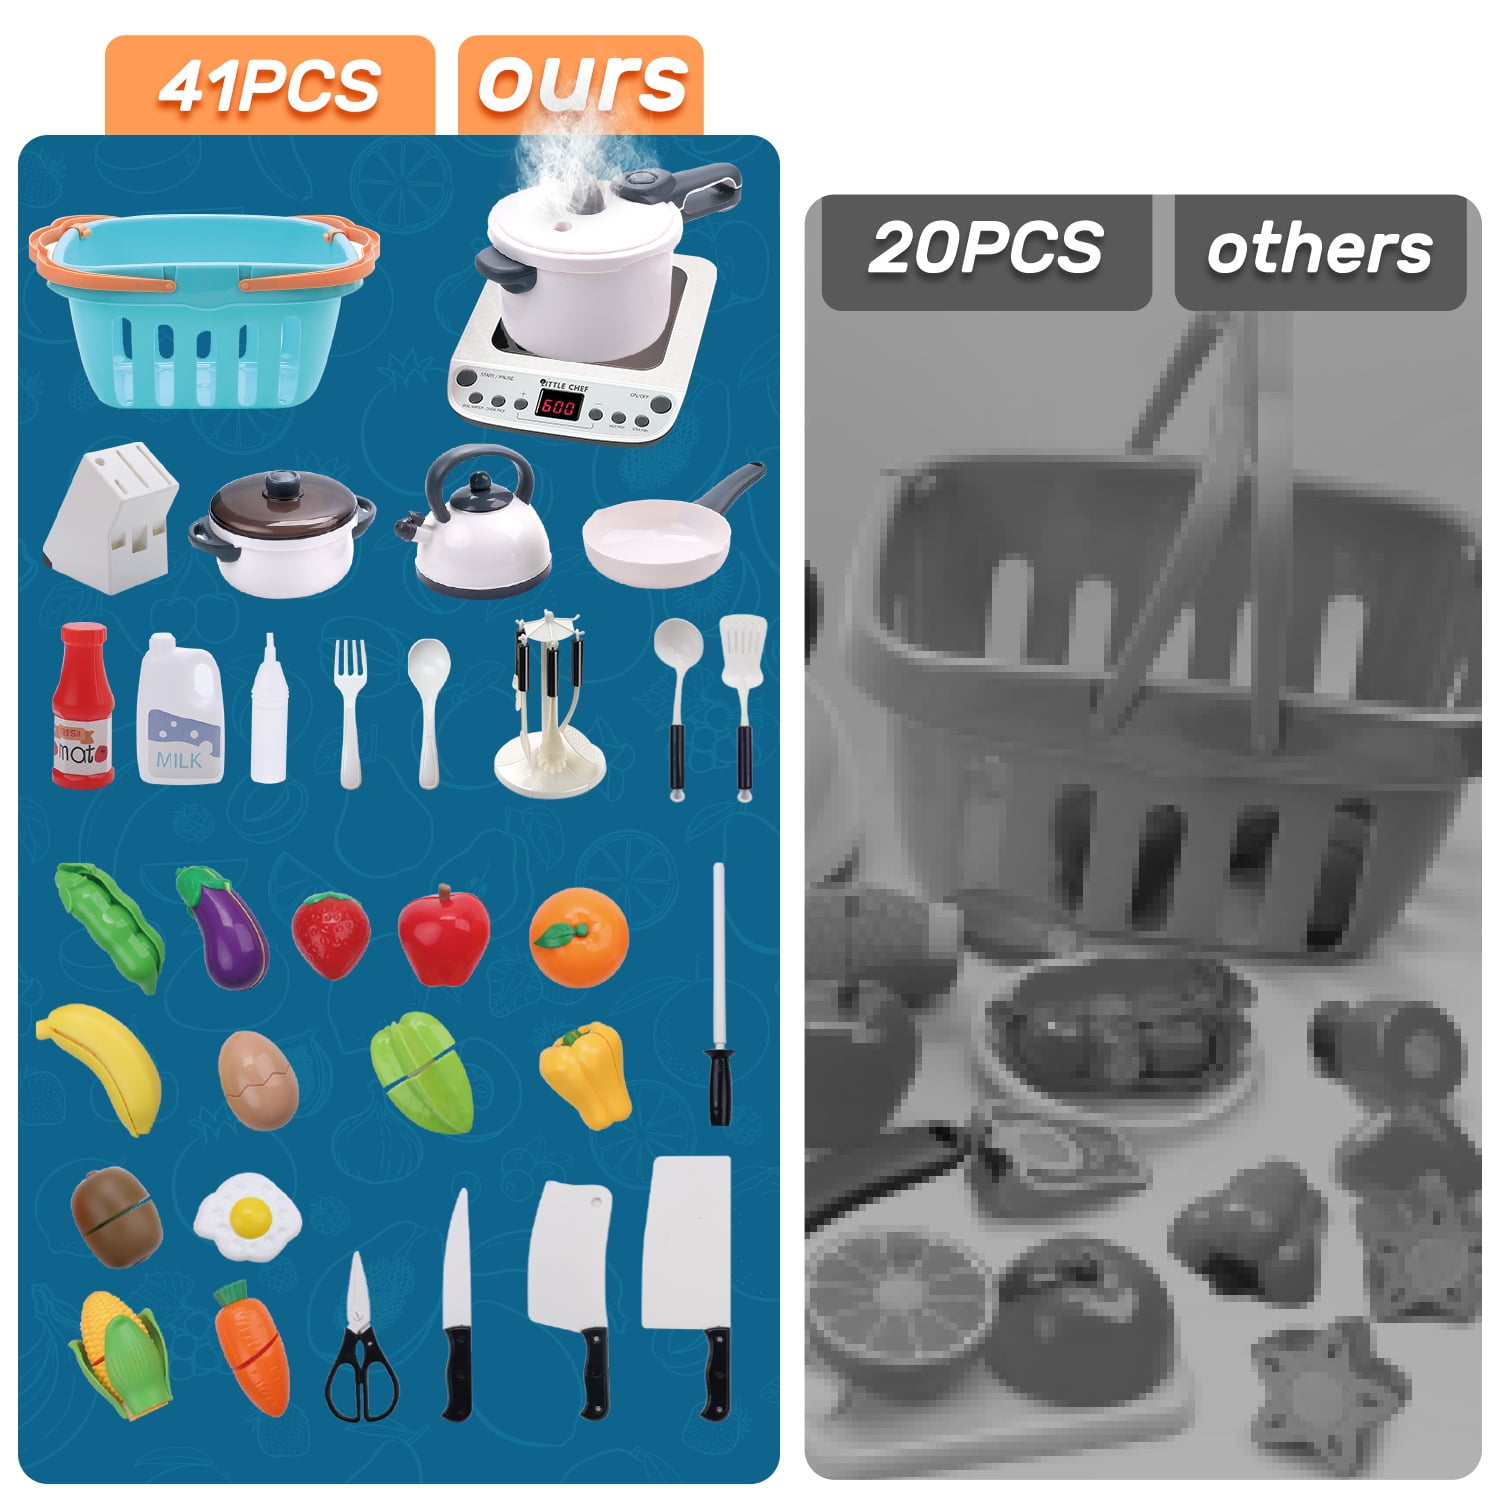 CUTE STONE 40PCS Kitchen Play Toy with Cookware Playset Steam Pressure Pot  and Electronic Induction Cooktop,Cooking Utensils,Toy Cutlery,Cut Play  Food,Shopping Basket Learning Gift for Girls Boys Kids 